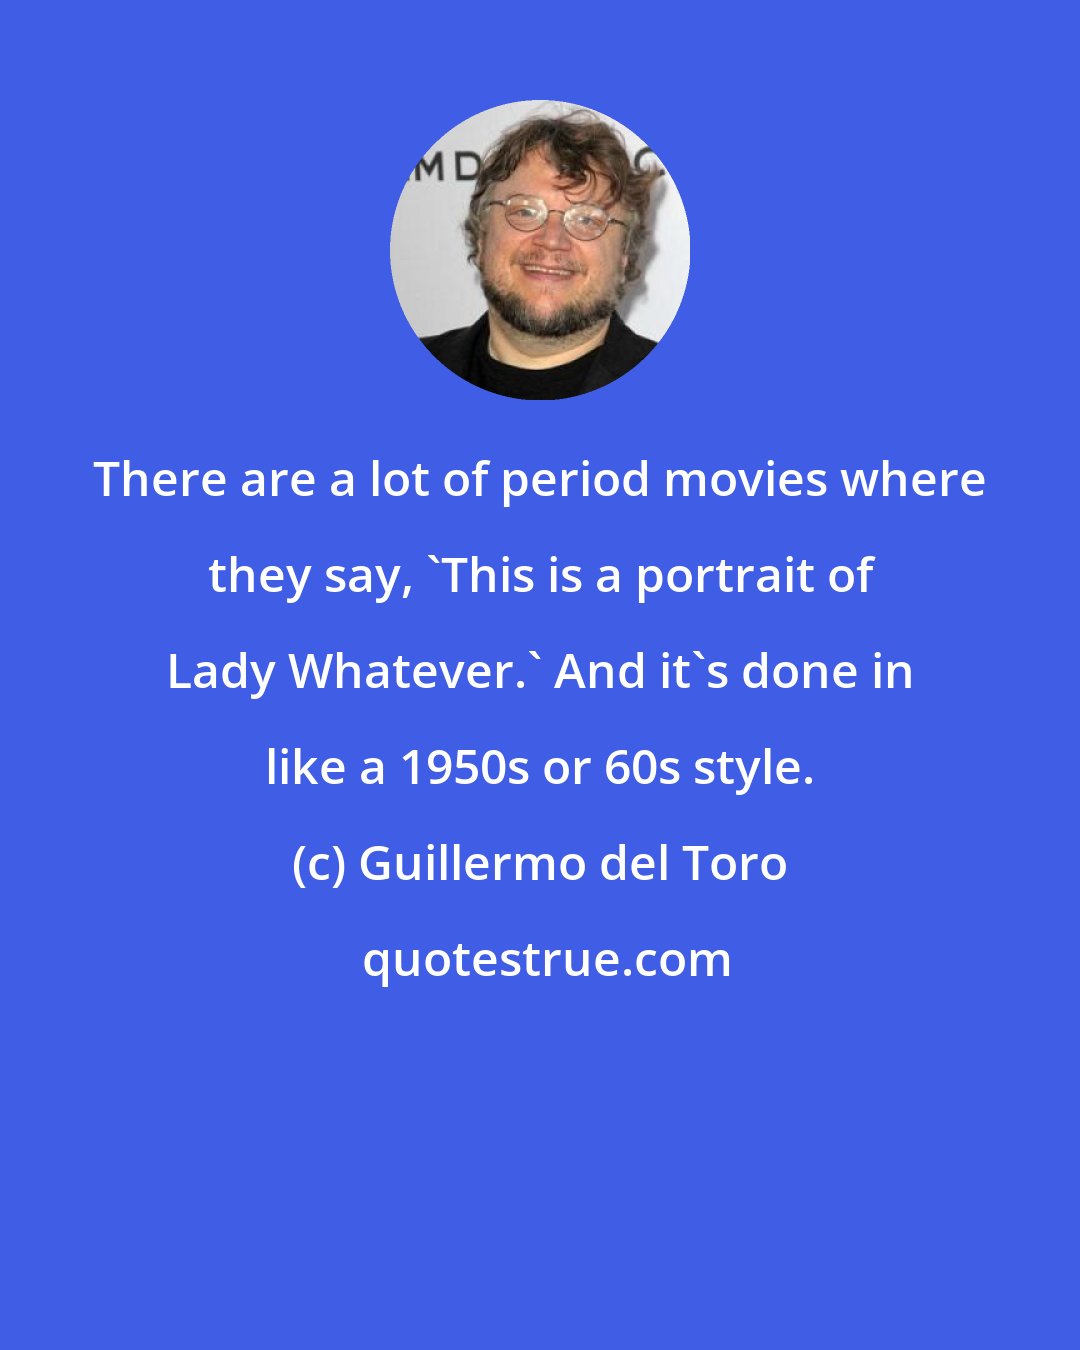 Guillermo del Toro: There are a lot of period movies where they say, 'This is a portrait of Lady Whatever.' And it's done in like a 1950s or 60s style.